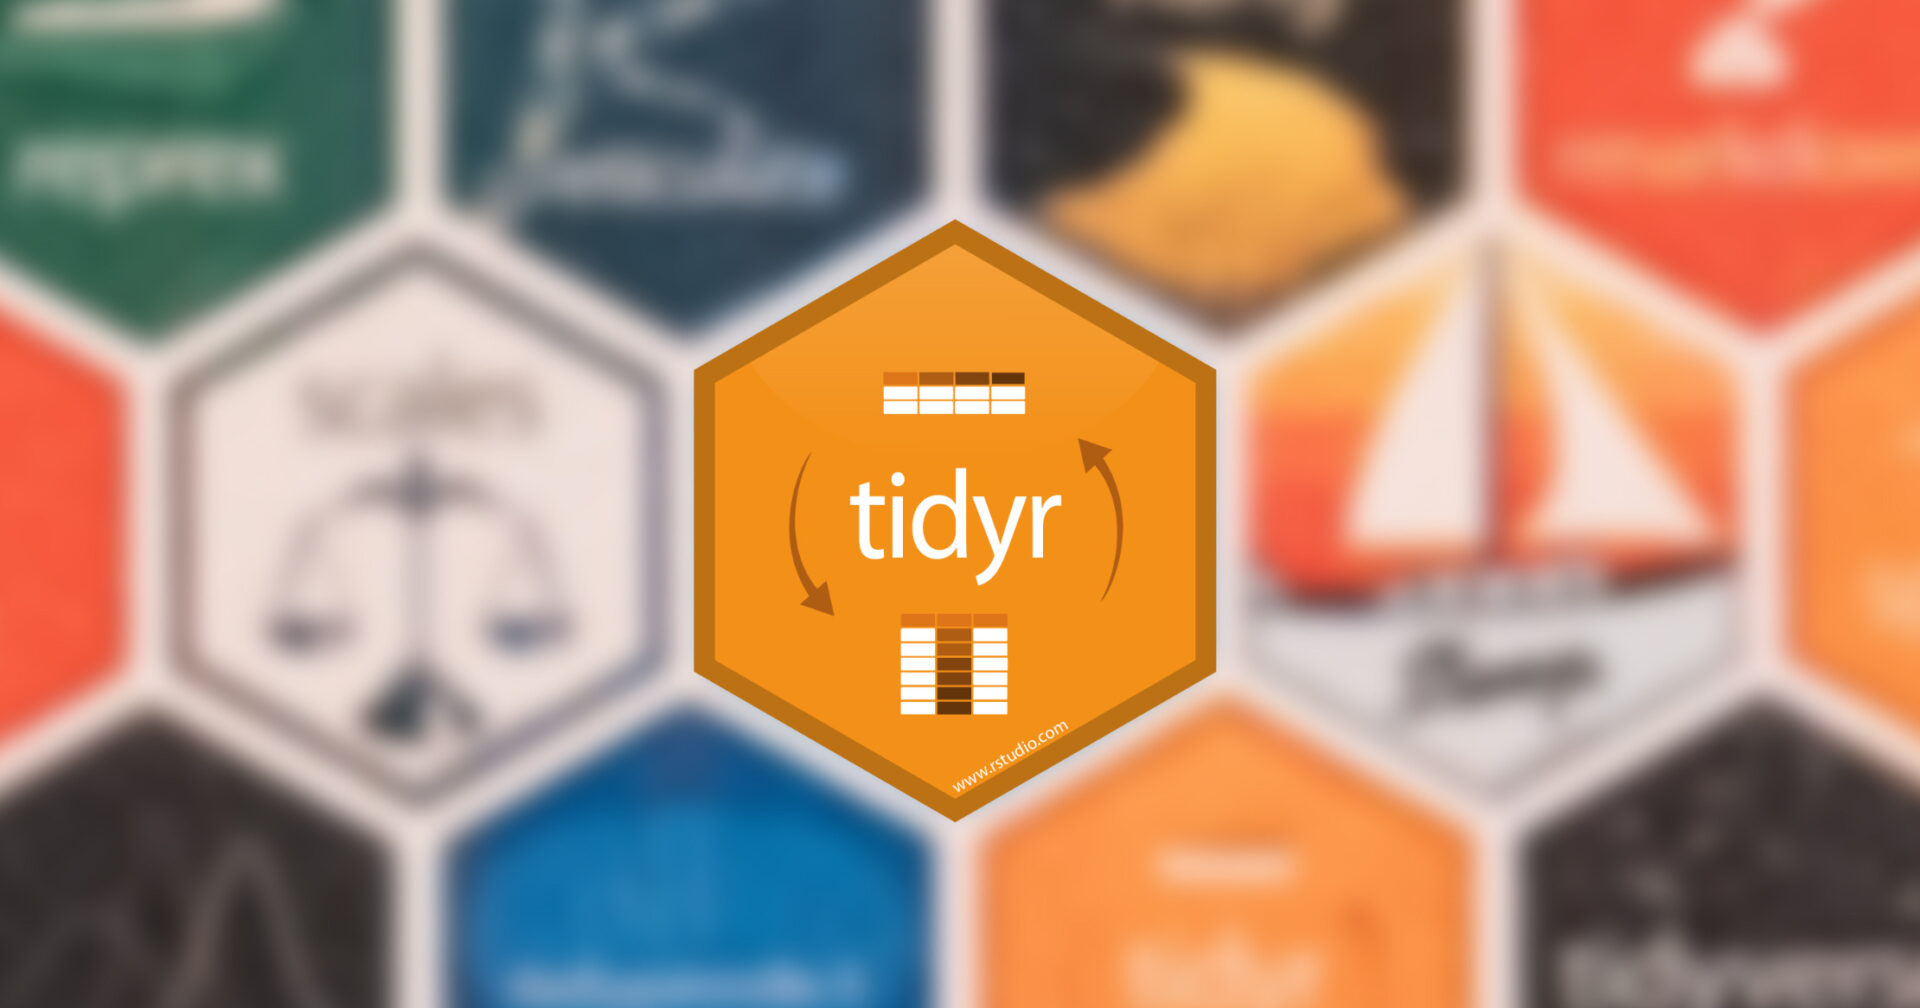 The tidyr package hex on a wall of blurred hexes of other packages